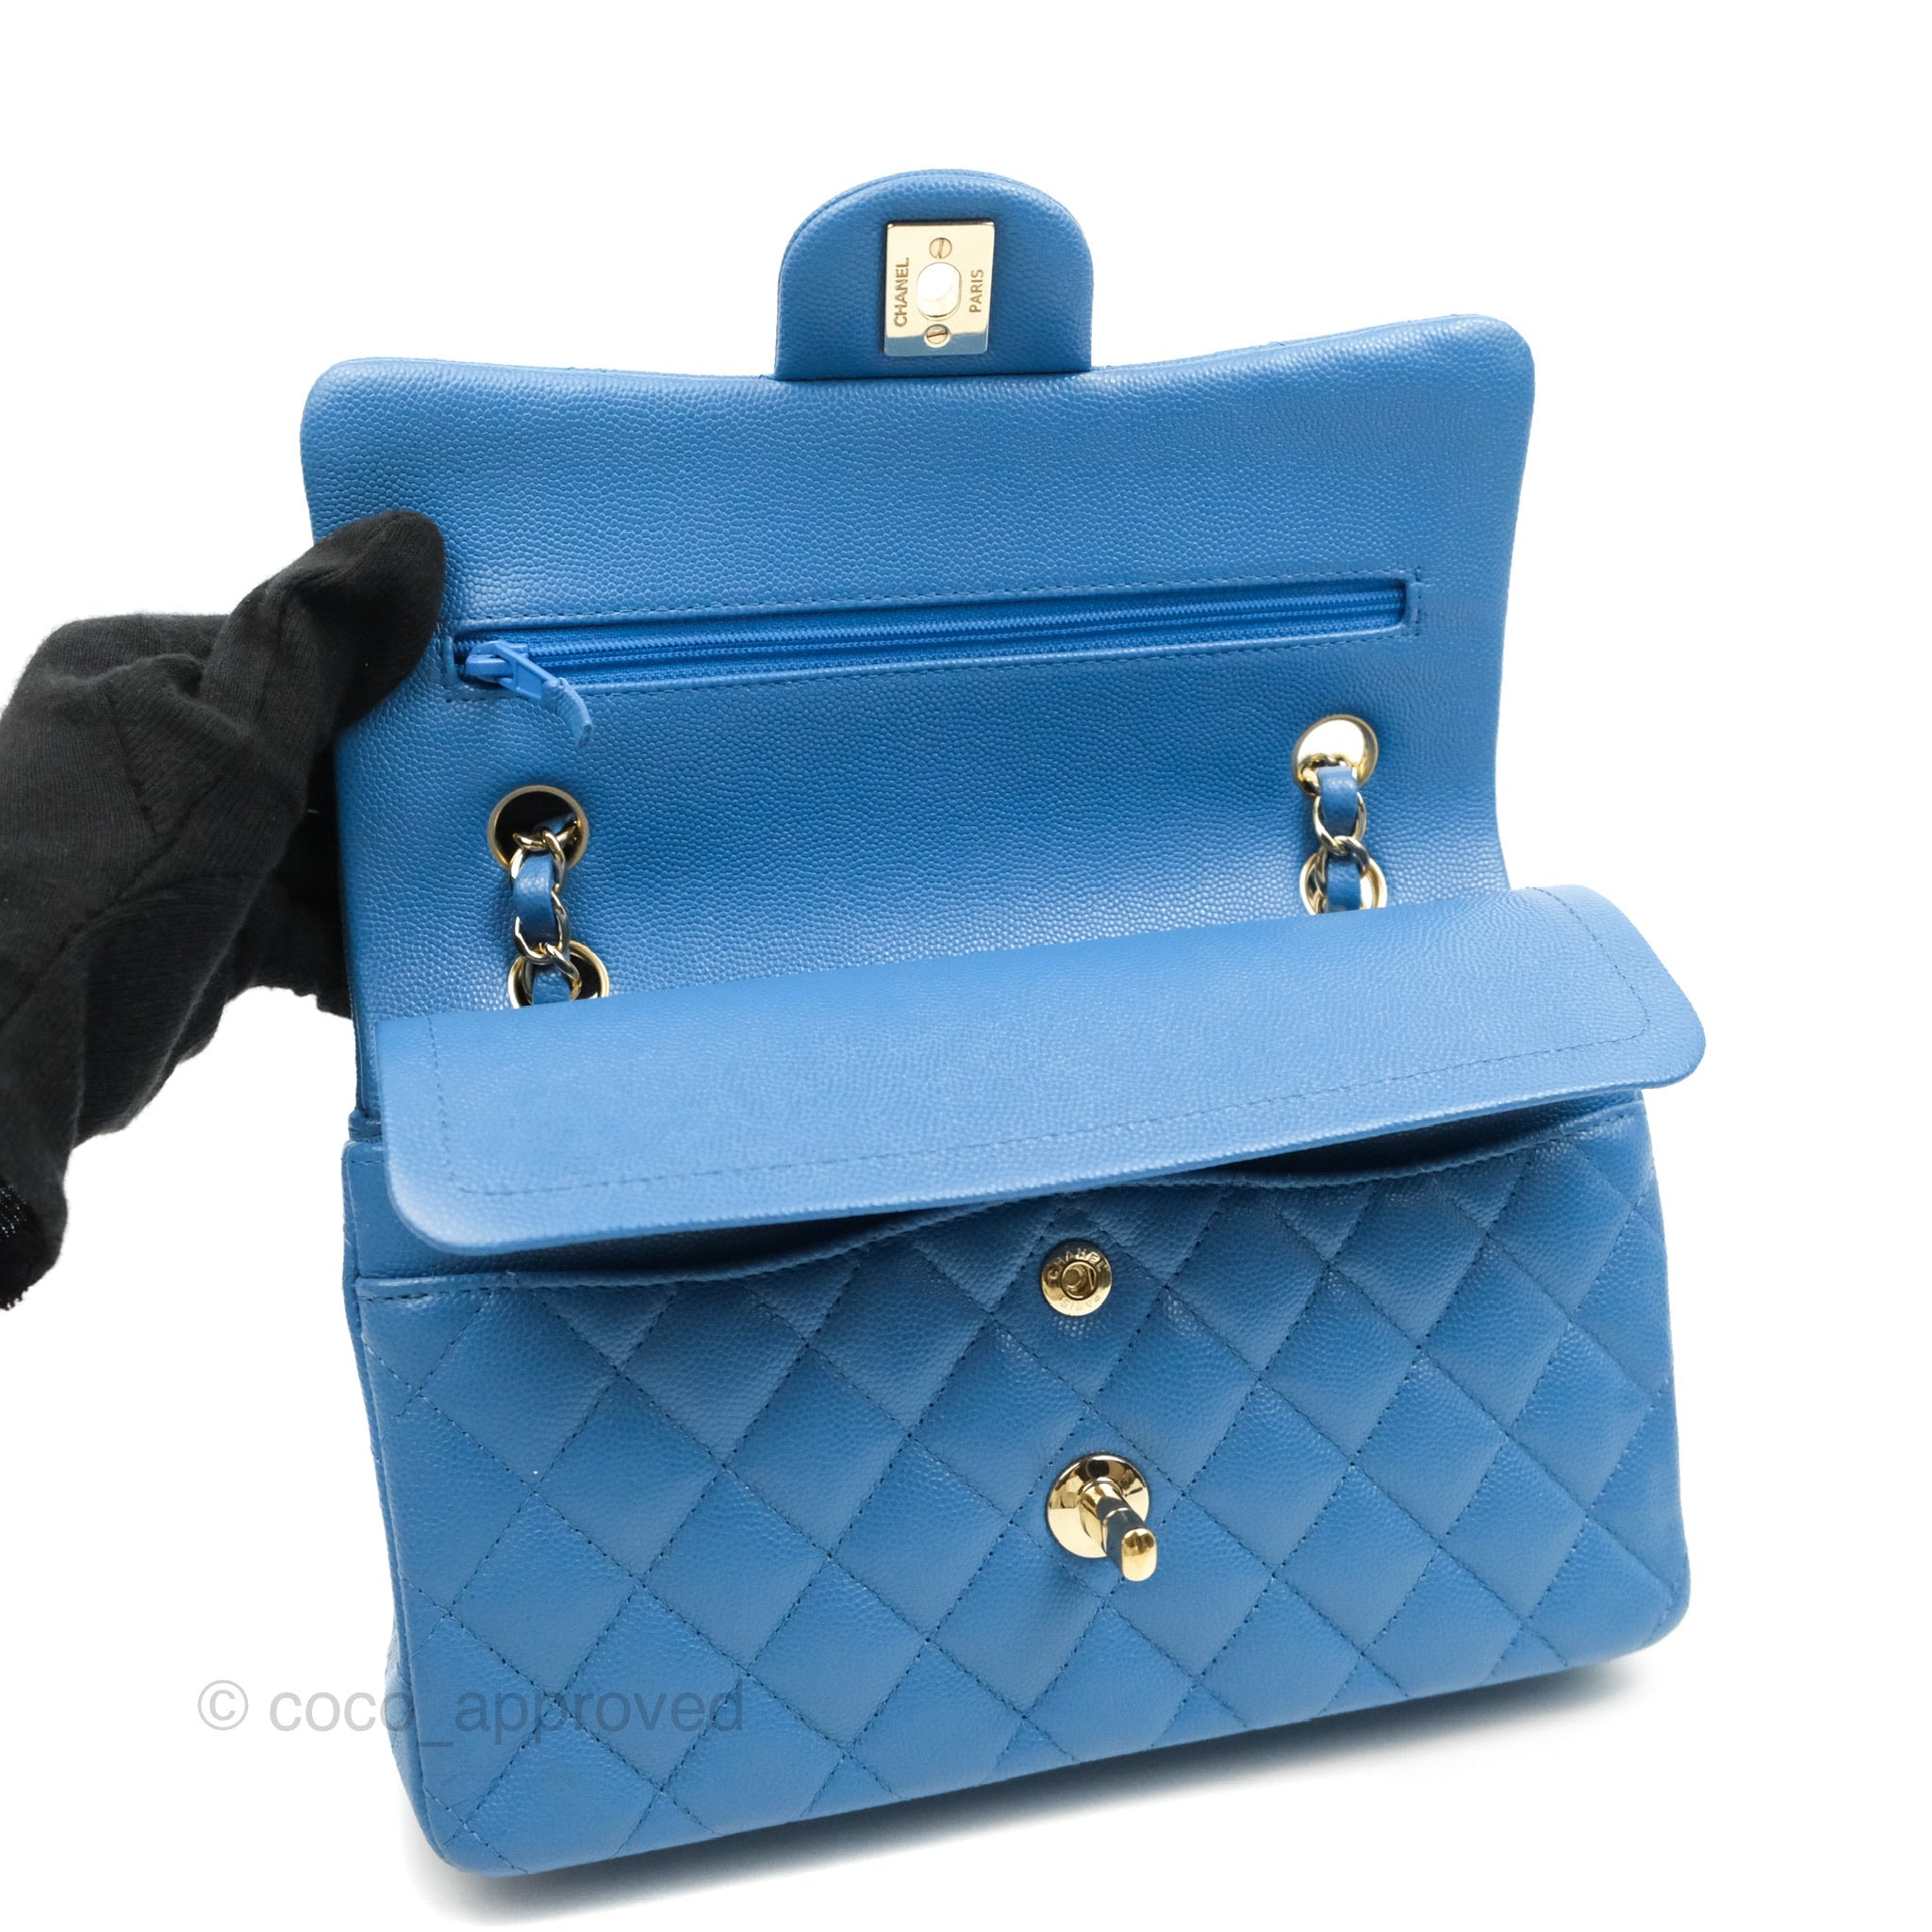 Chanel Blue Quilted Leather Small Frame In Flap Bag – Coco Approved Studio